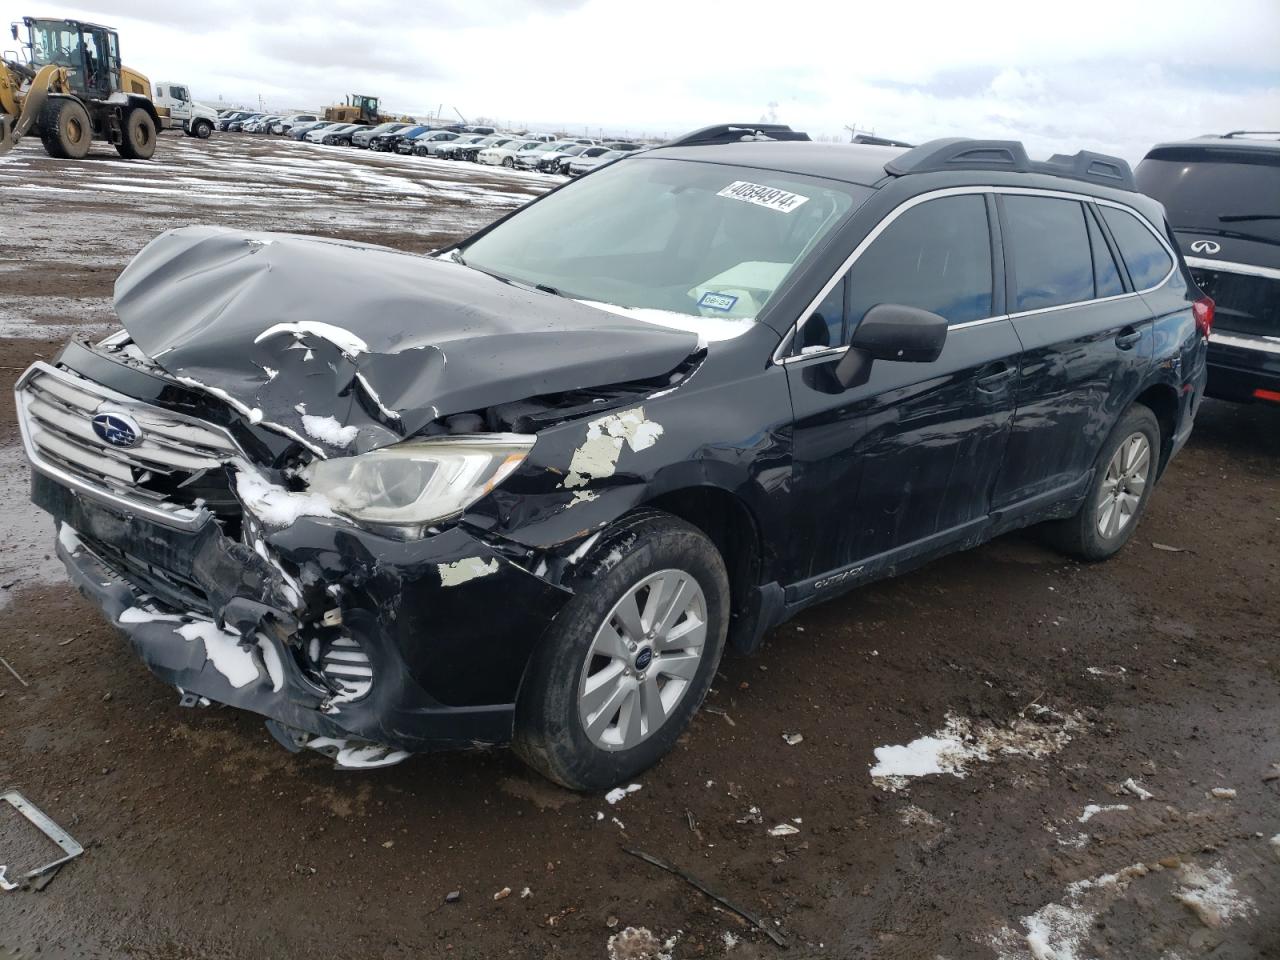 vin: 4S4BSAAC1H3202045 4S4BSAAC1H3202045 2017 subaru outback 2500 for Sale in 80603 9337, Co - Denver, Brighton, USA